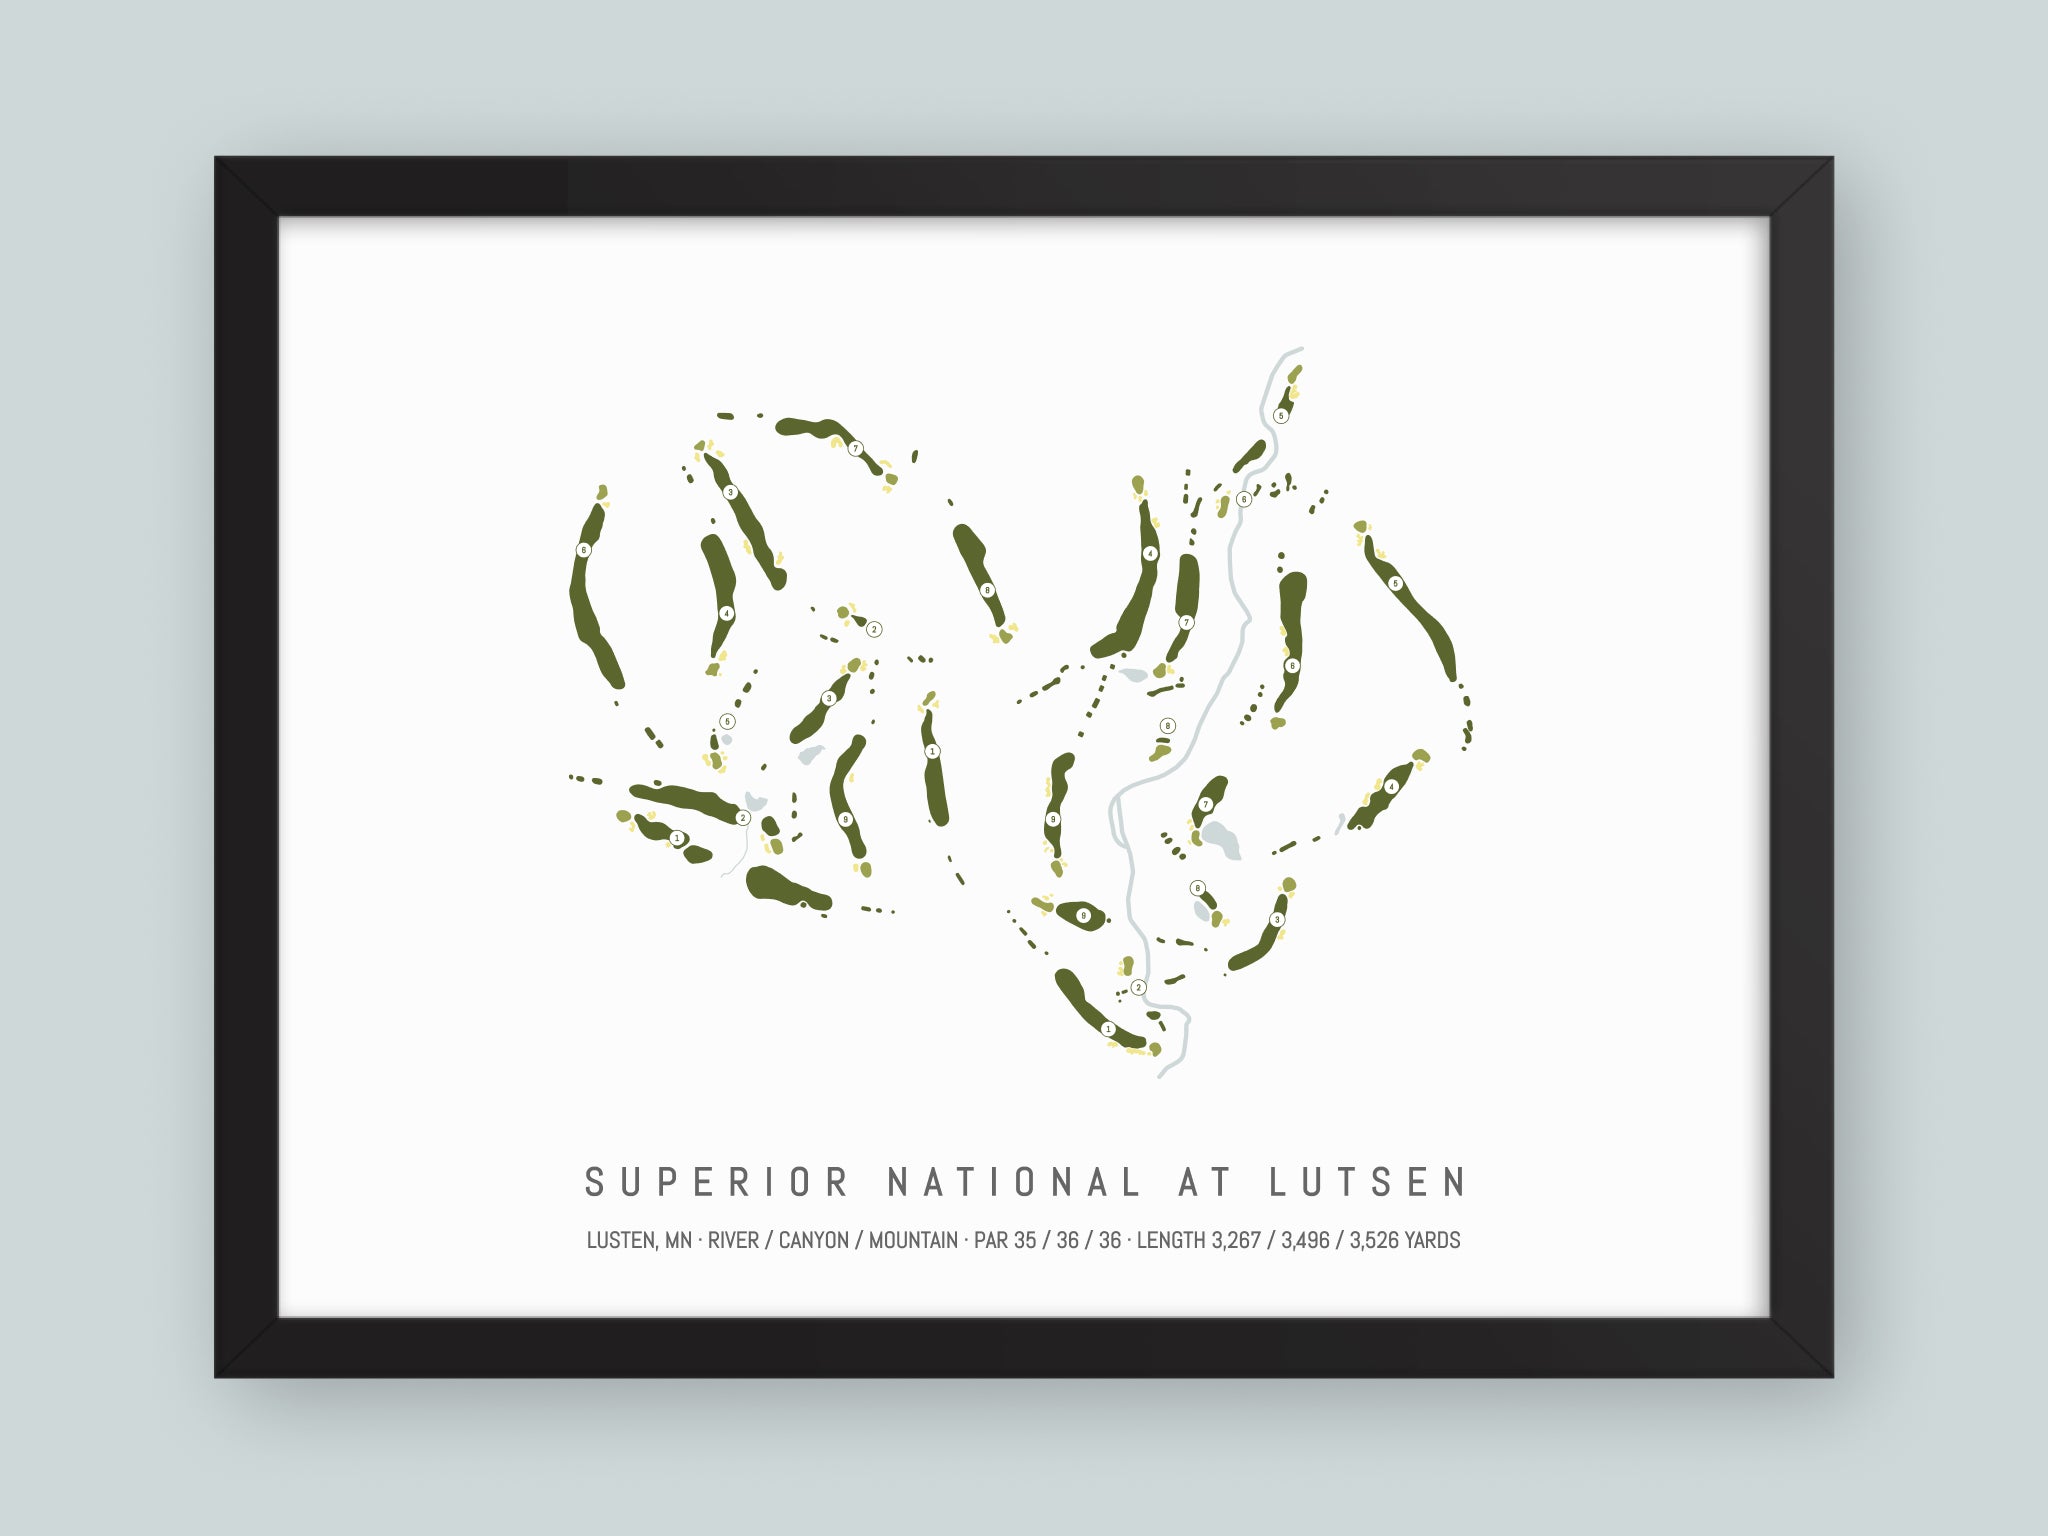 Superior-National-at-Lutsen-MN--Black-Frame-24x18-With-Hole-Numbers